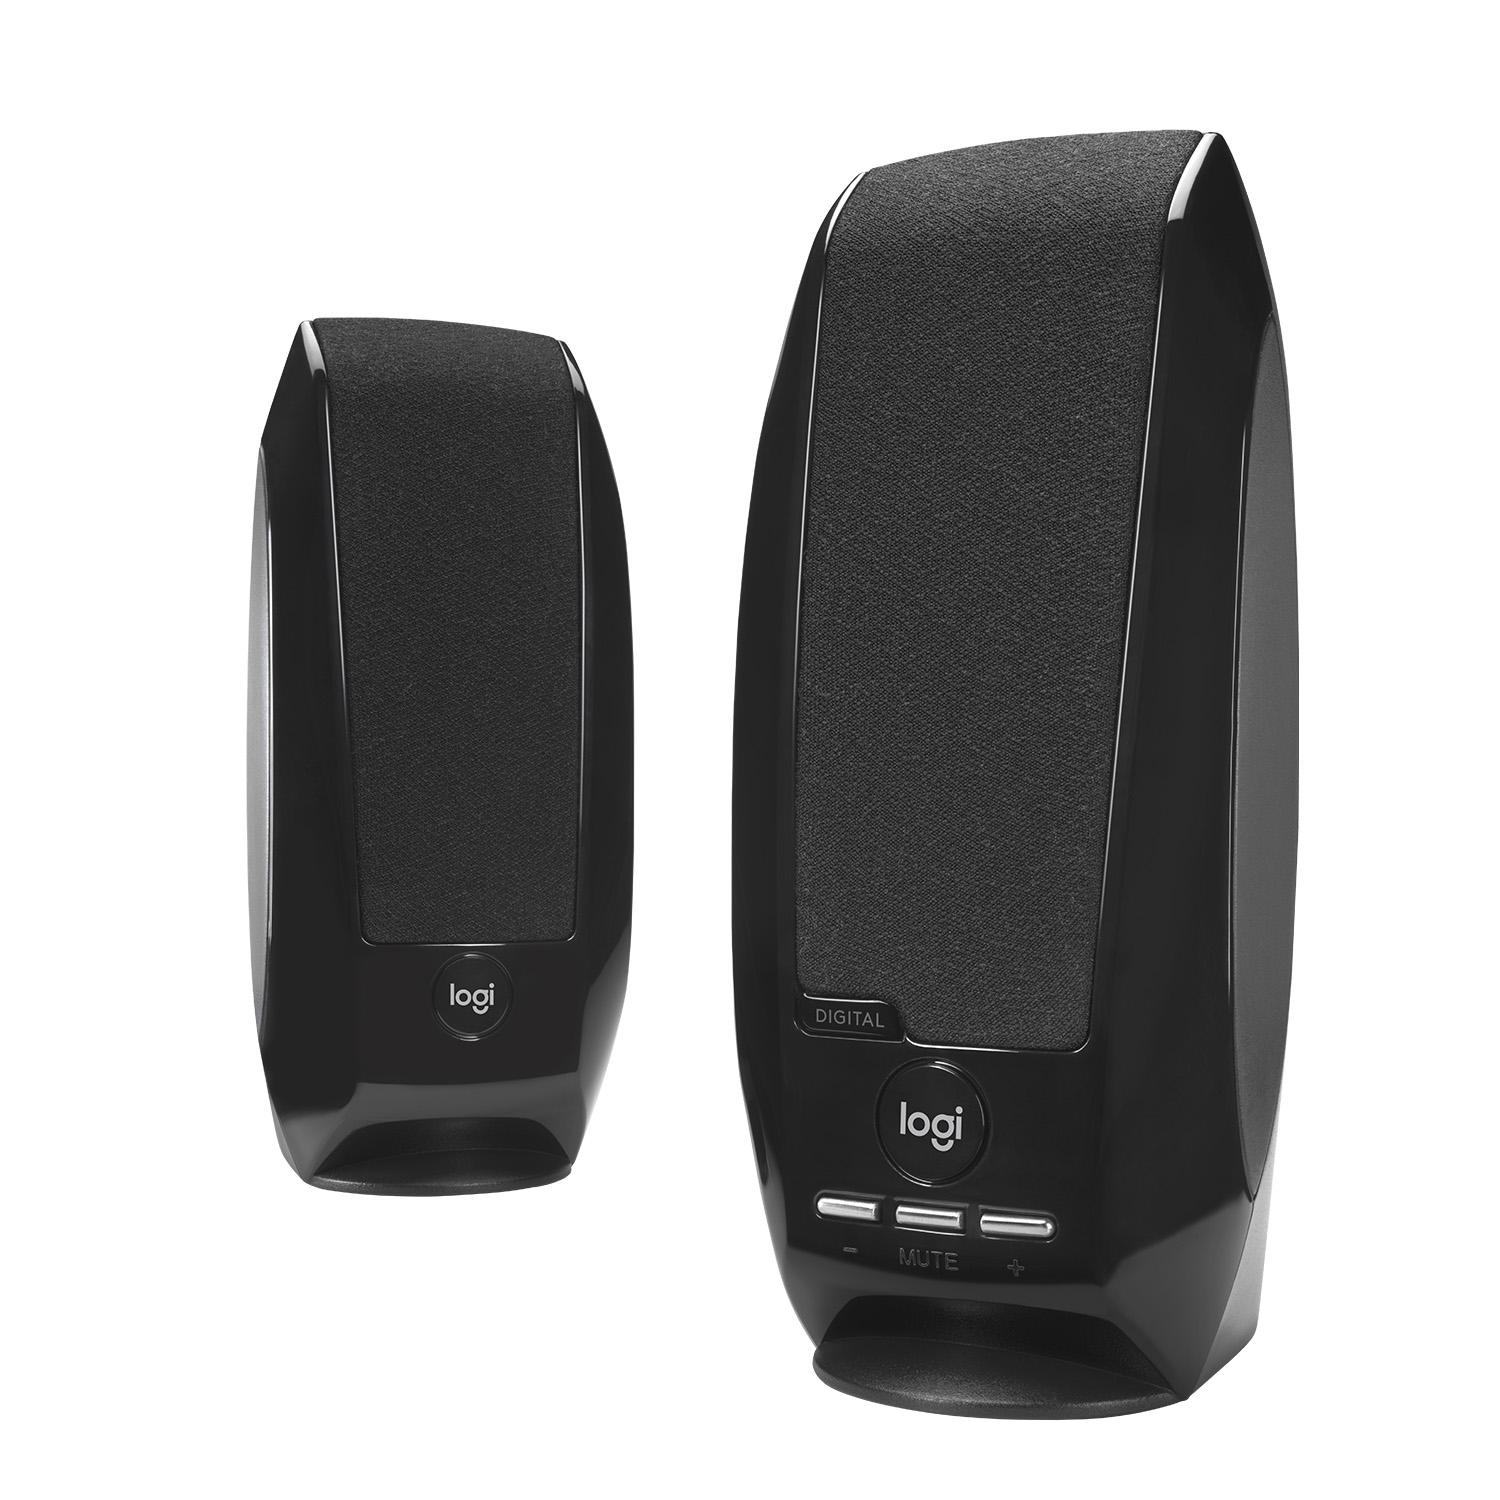 Logitech S150 USB Speakers with Digital Sound - image 4 of 5